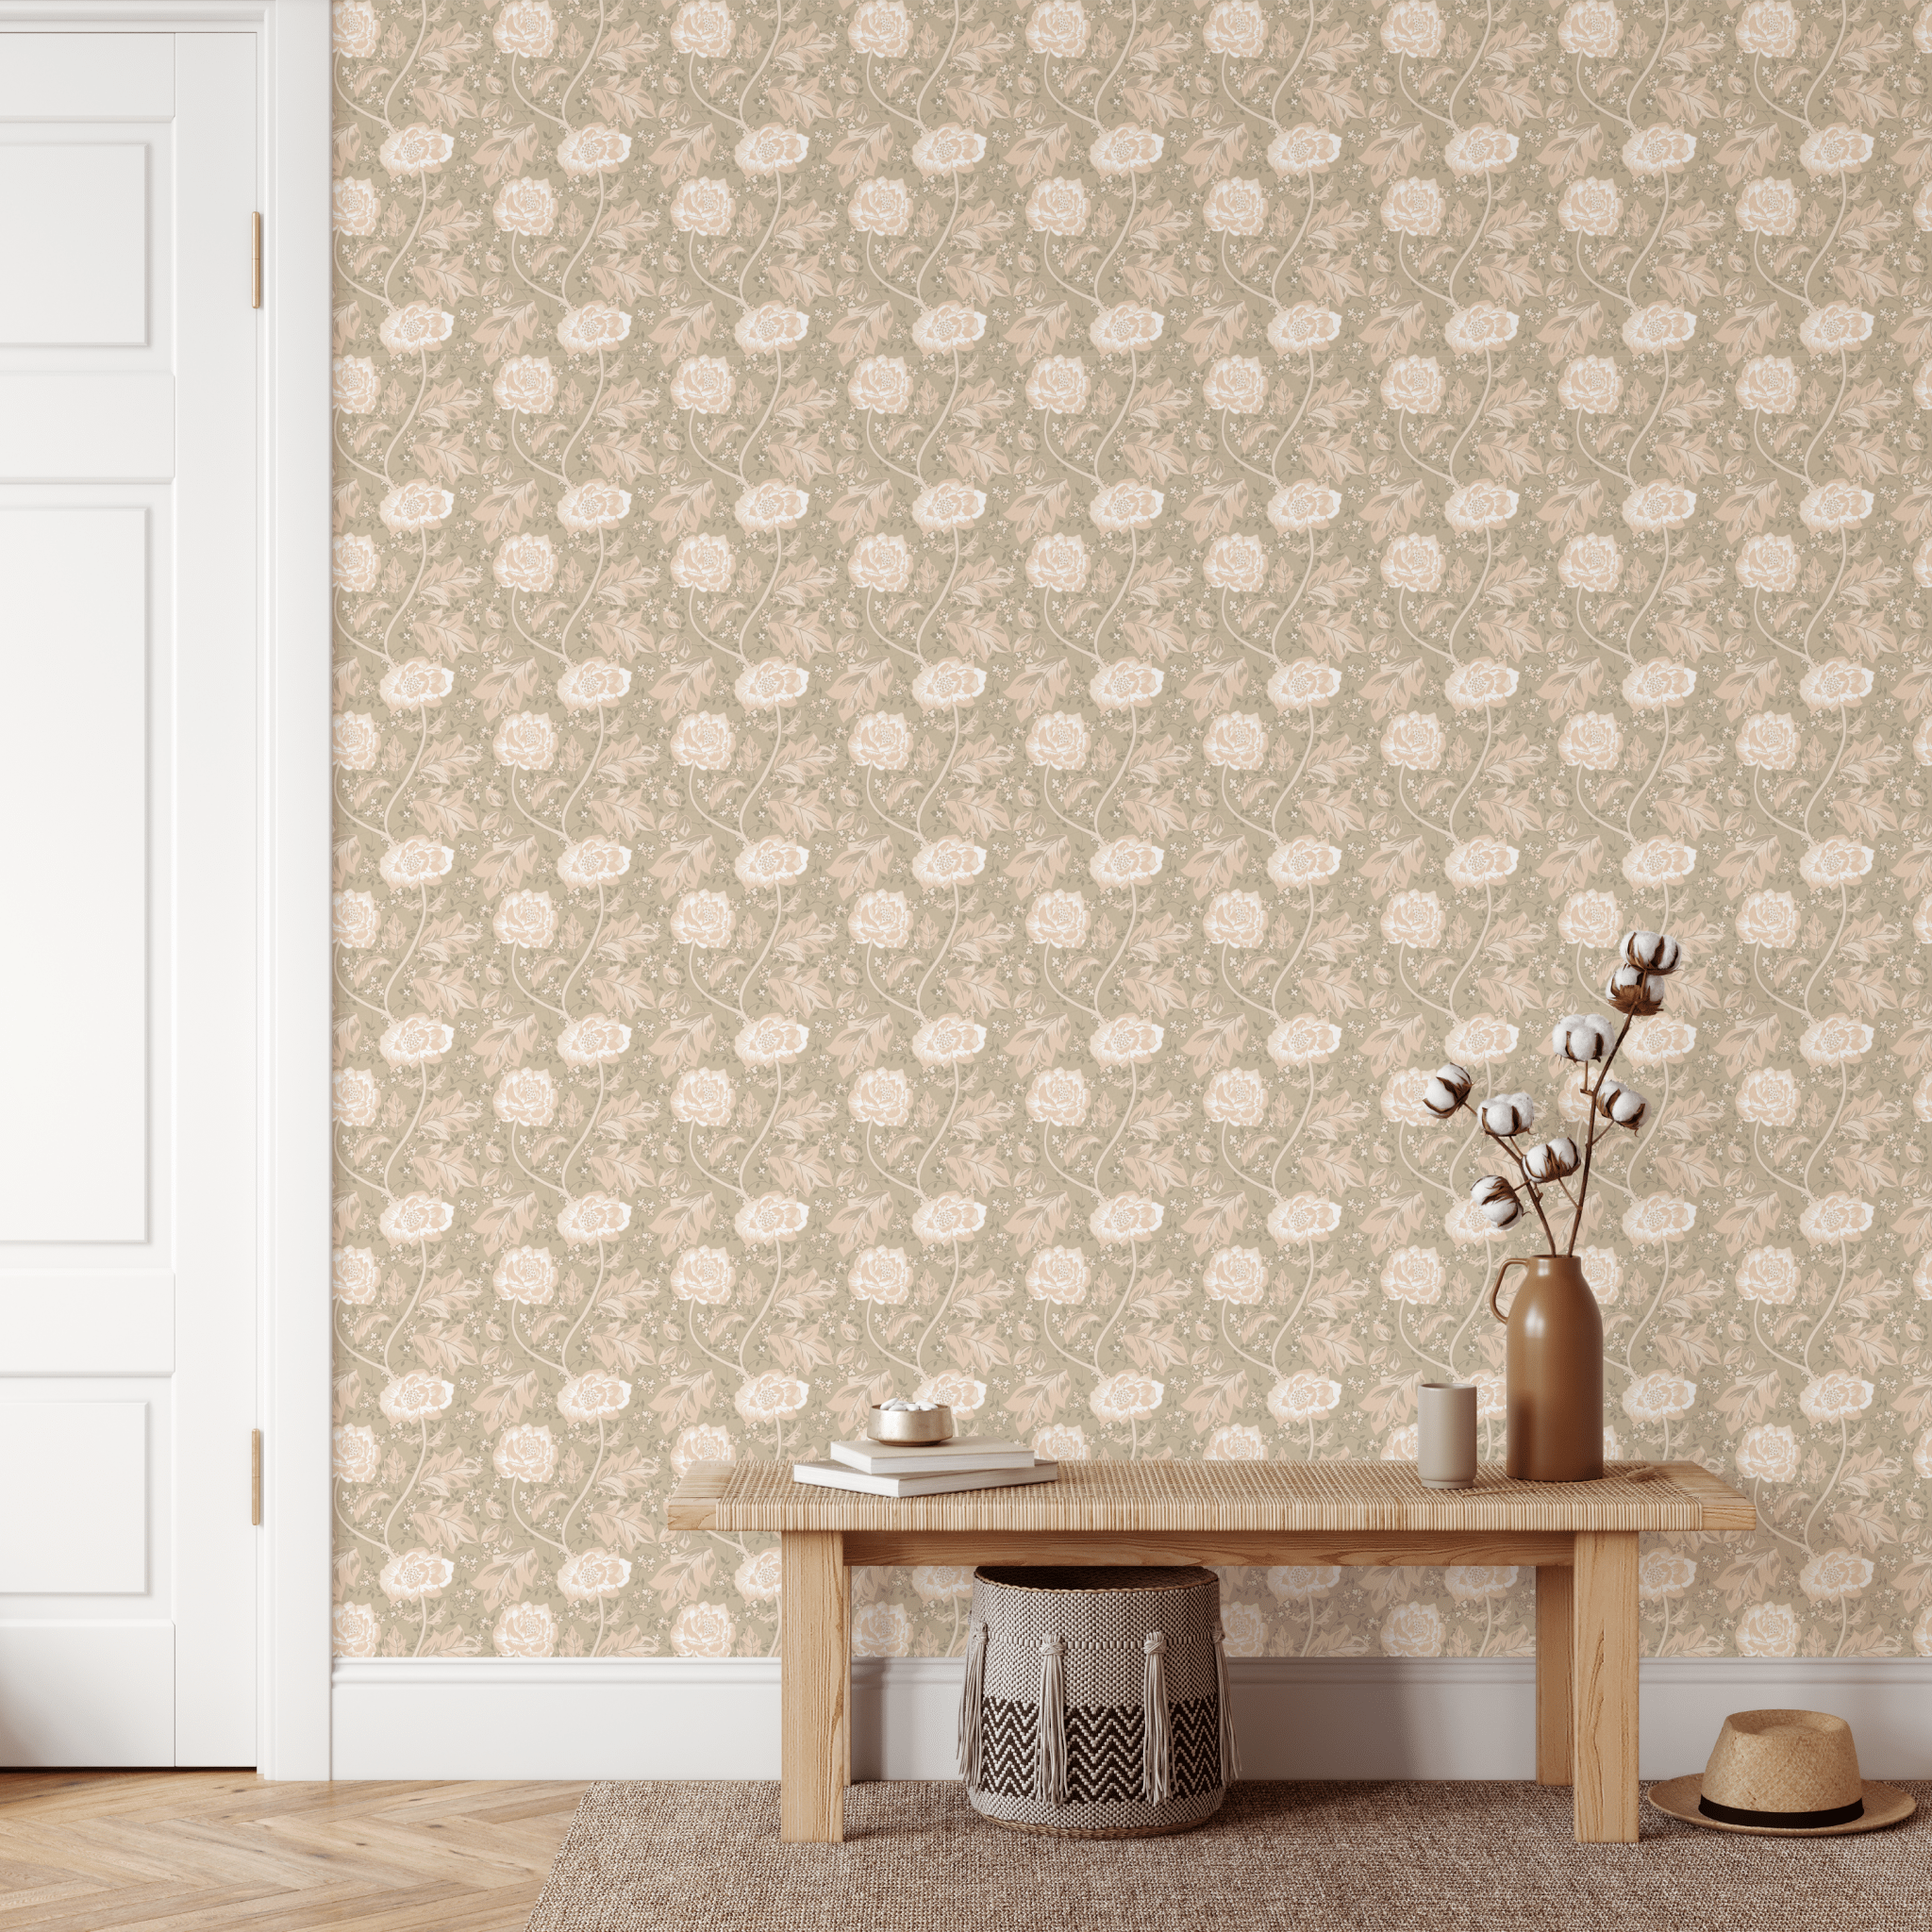 Home entryway featuring blush bouquet peel and stick wallpaper with elegant floral designs in muted tones.